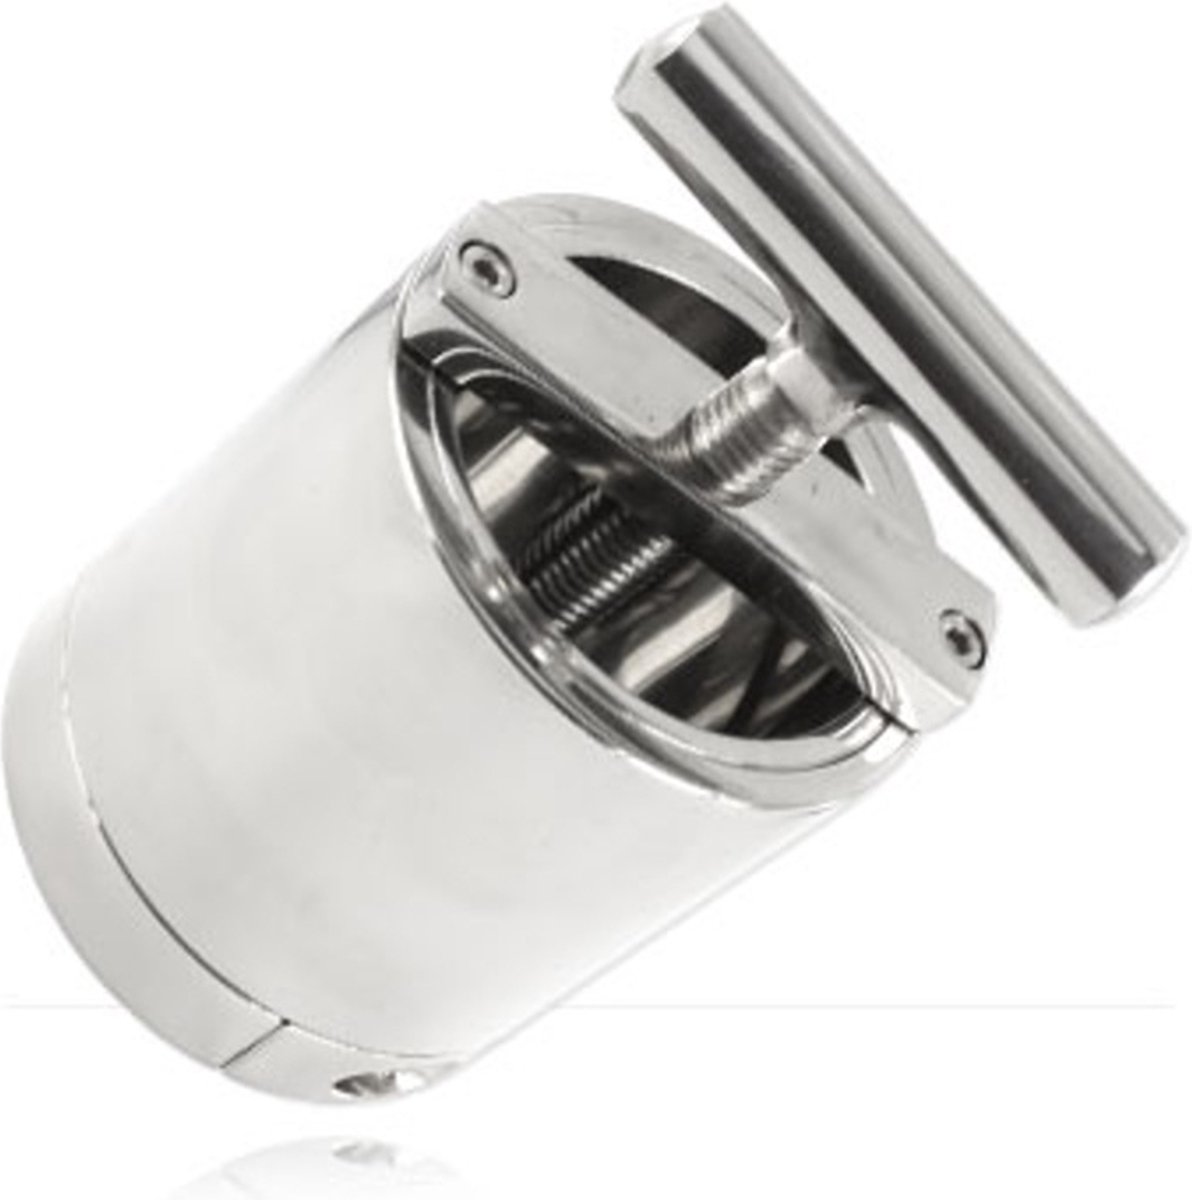 The ball flask stainless steel crusher